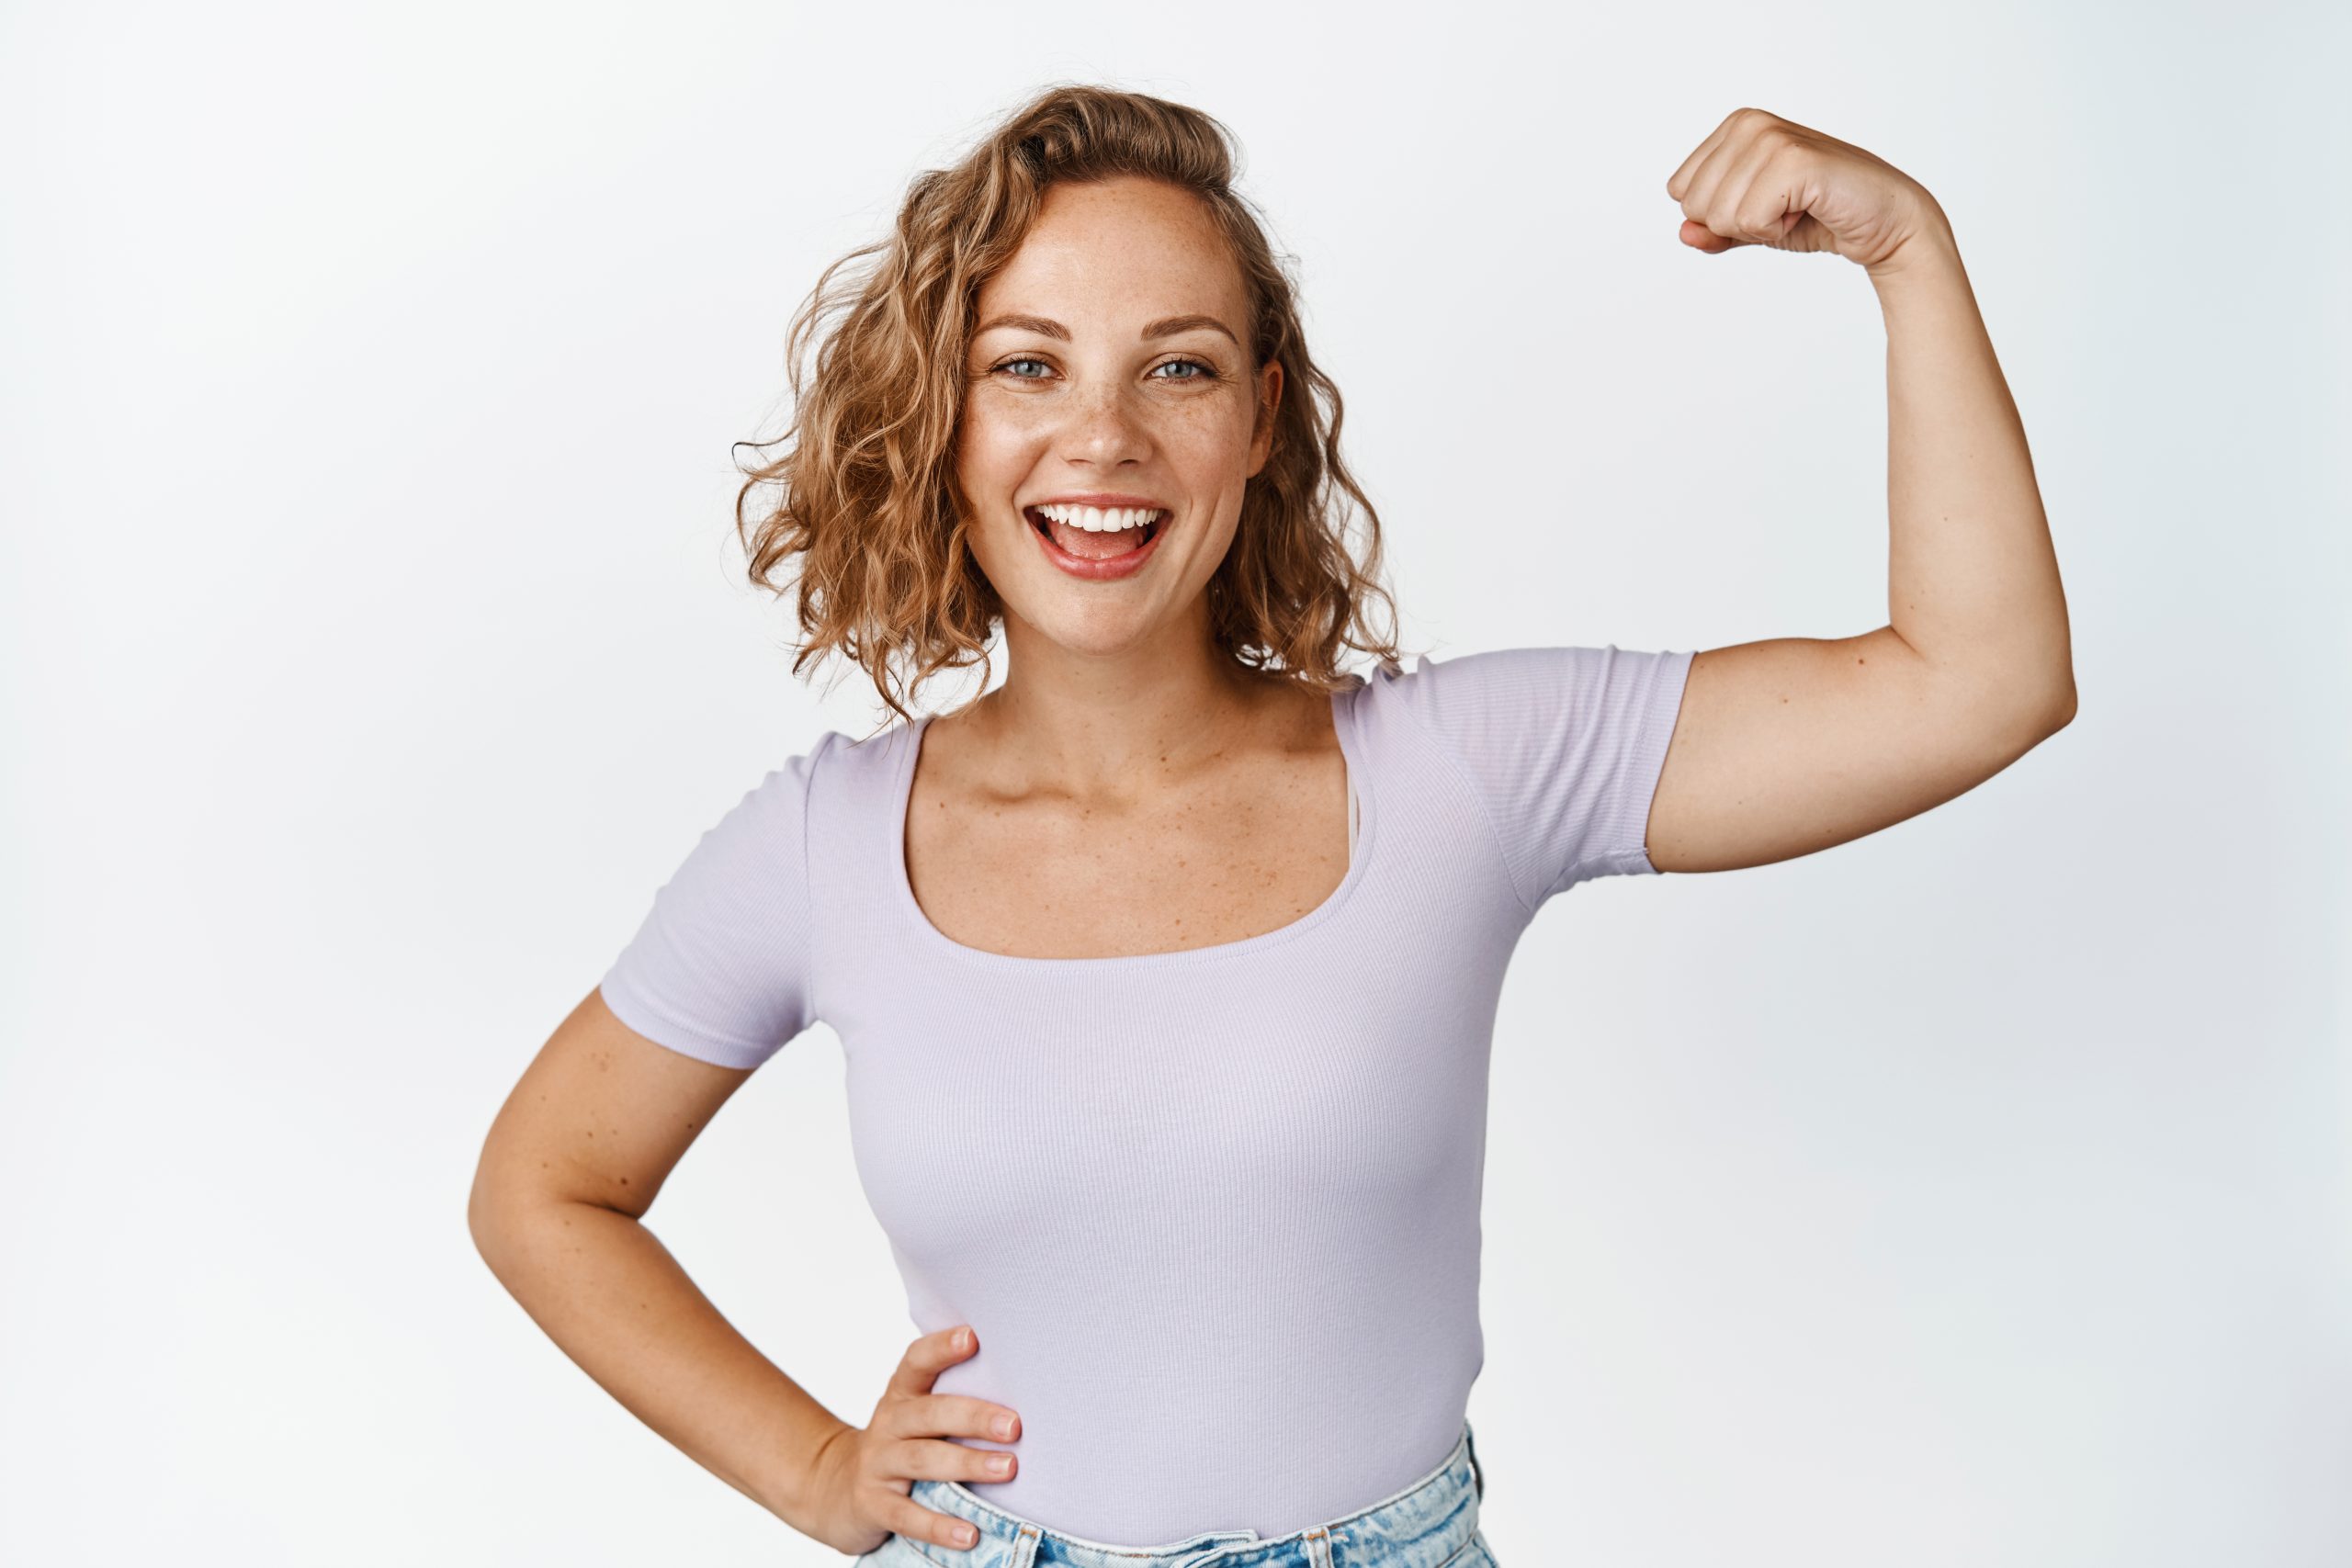 image-of-positive-blond-girl-smiles-flex-biceps-shows-strong-arm-muscles-stands-against-white-background